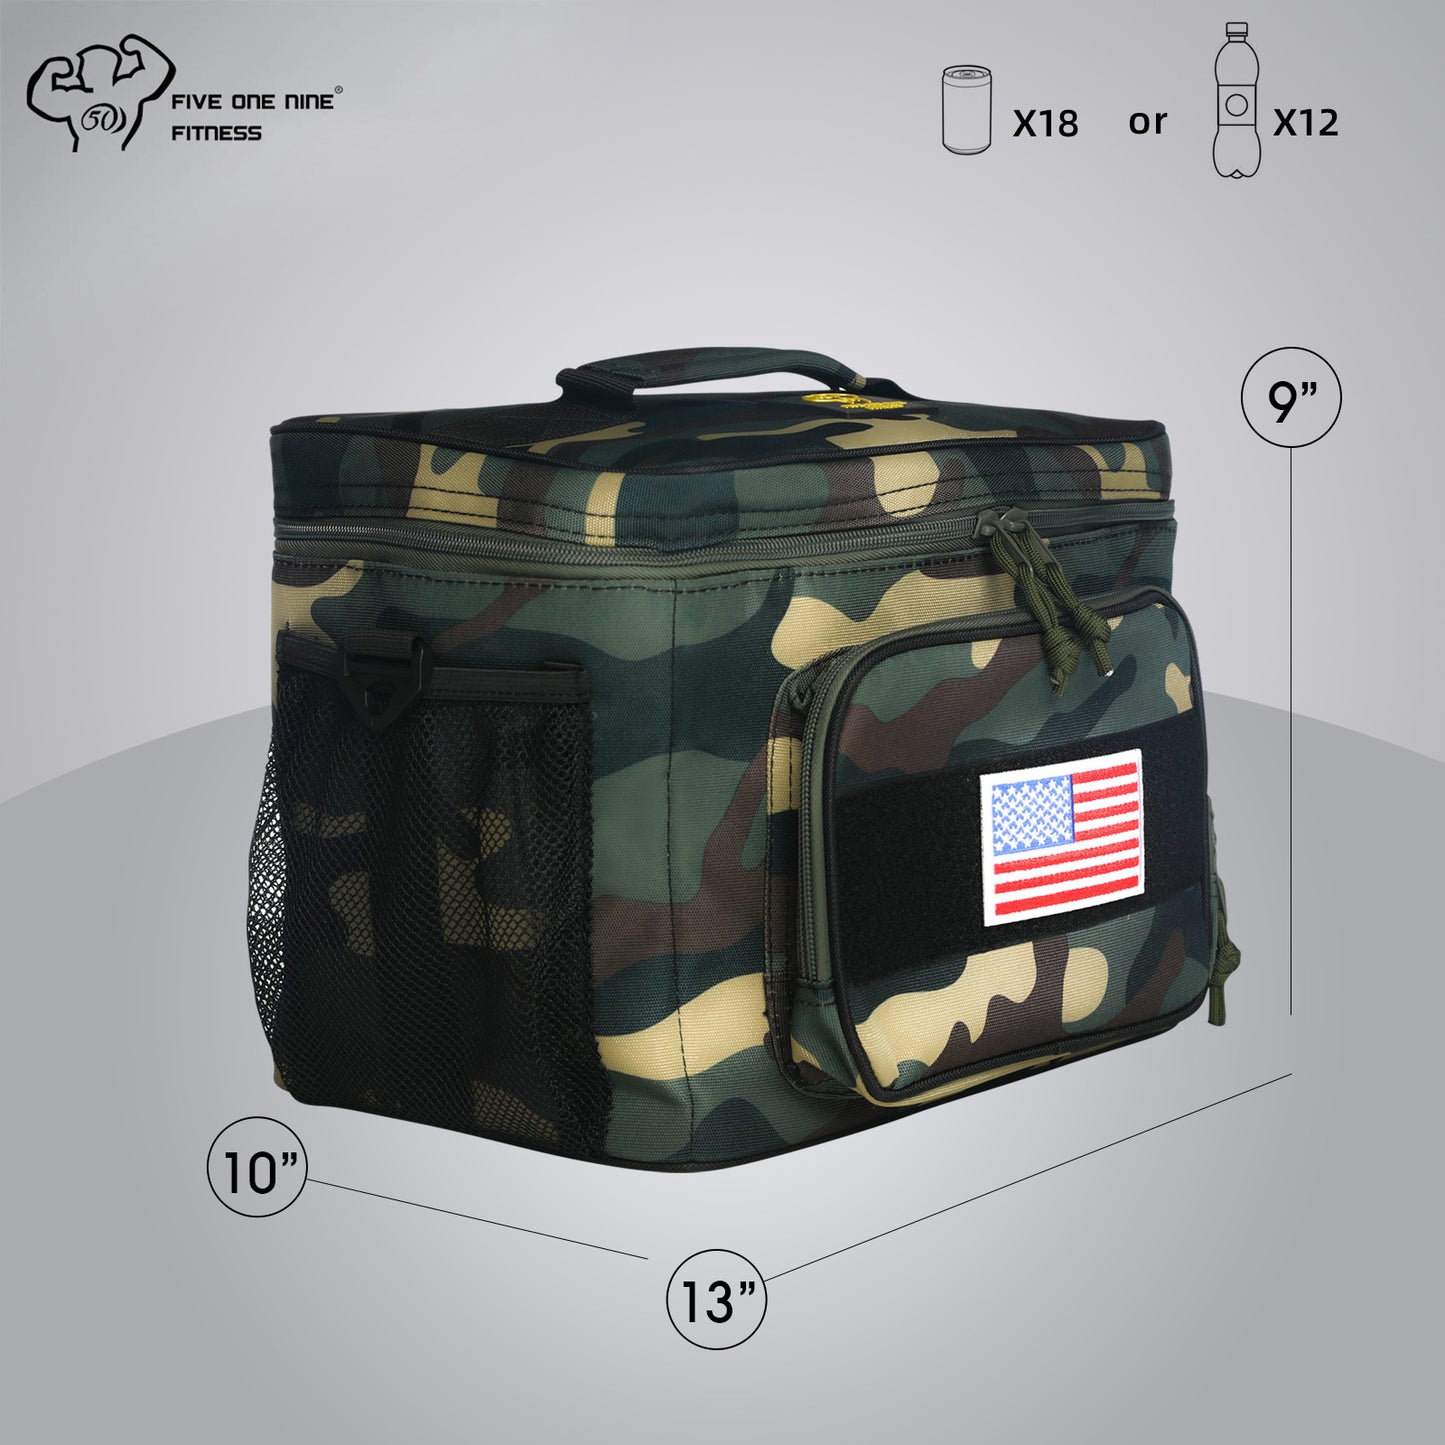 Tactical Lunch Bag,519 Fitness Insulated Lunch Box for Men Adult, Up to 16 Hours Insulation, Leakproof Meal Prep Bag for Work Picnic Travel School (Green Camo)…